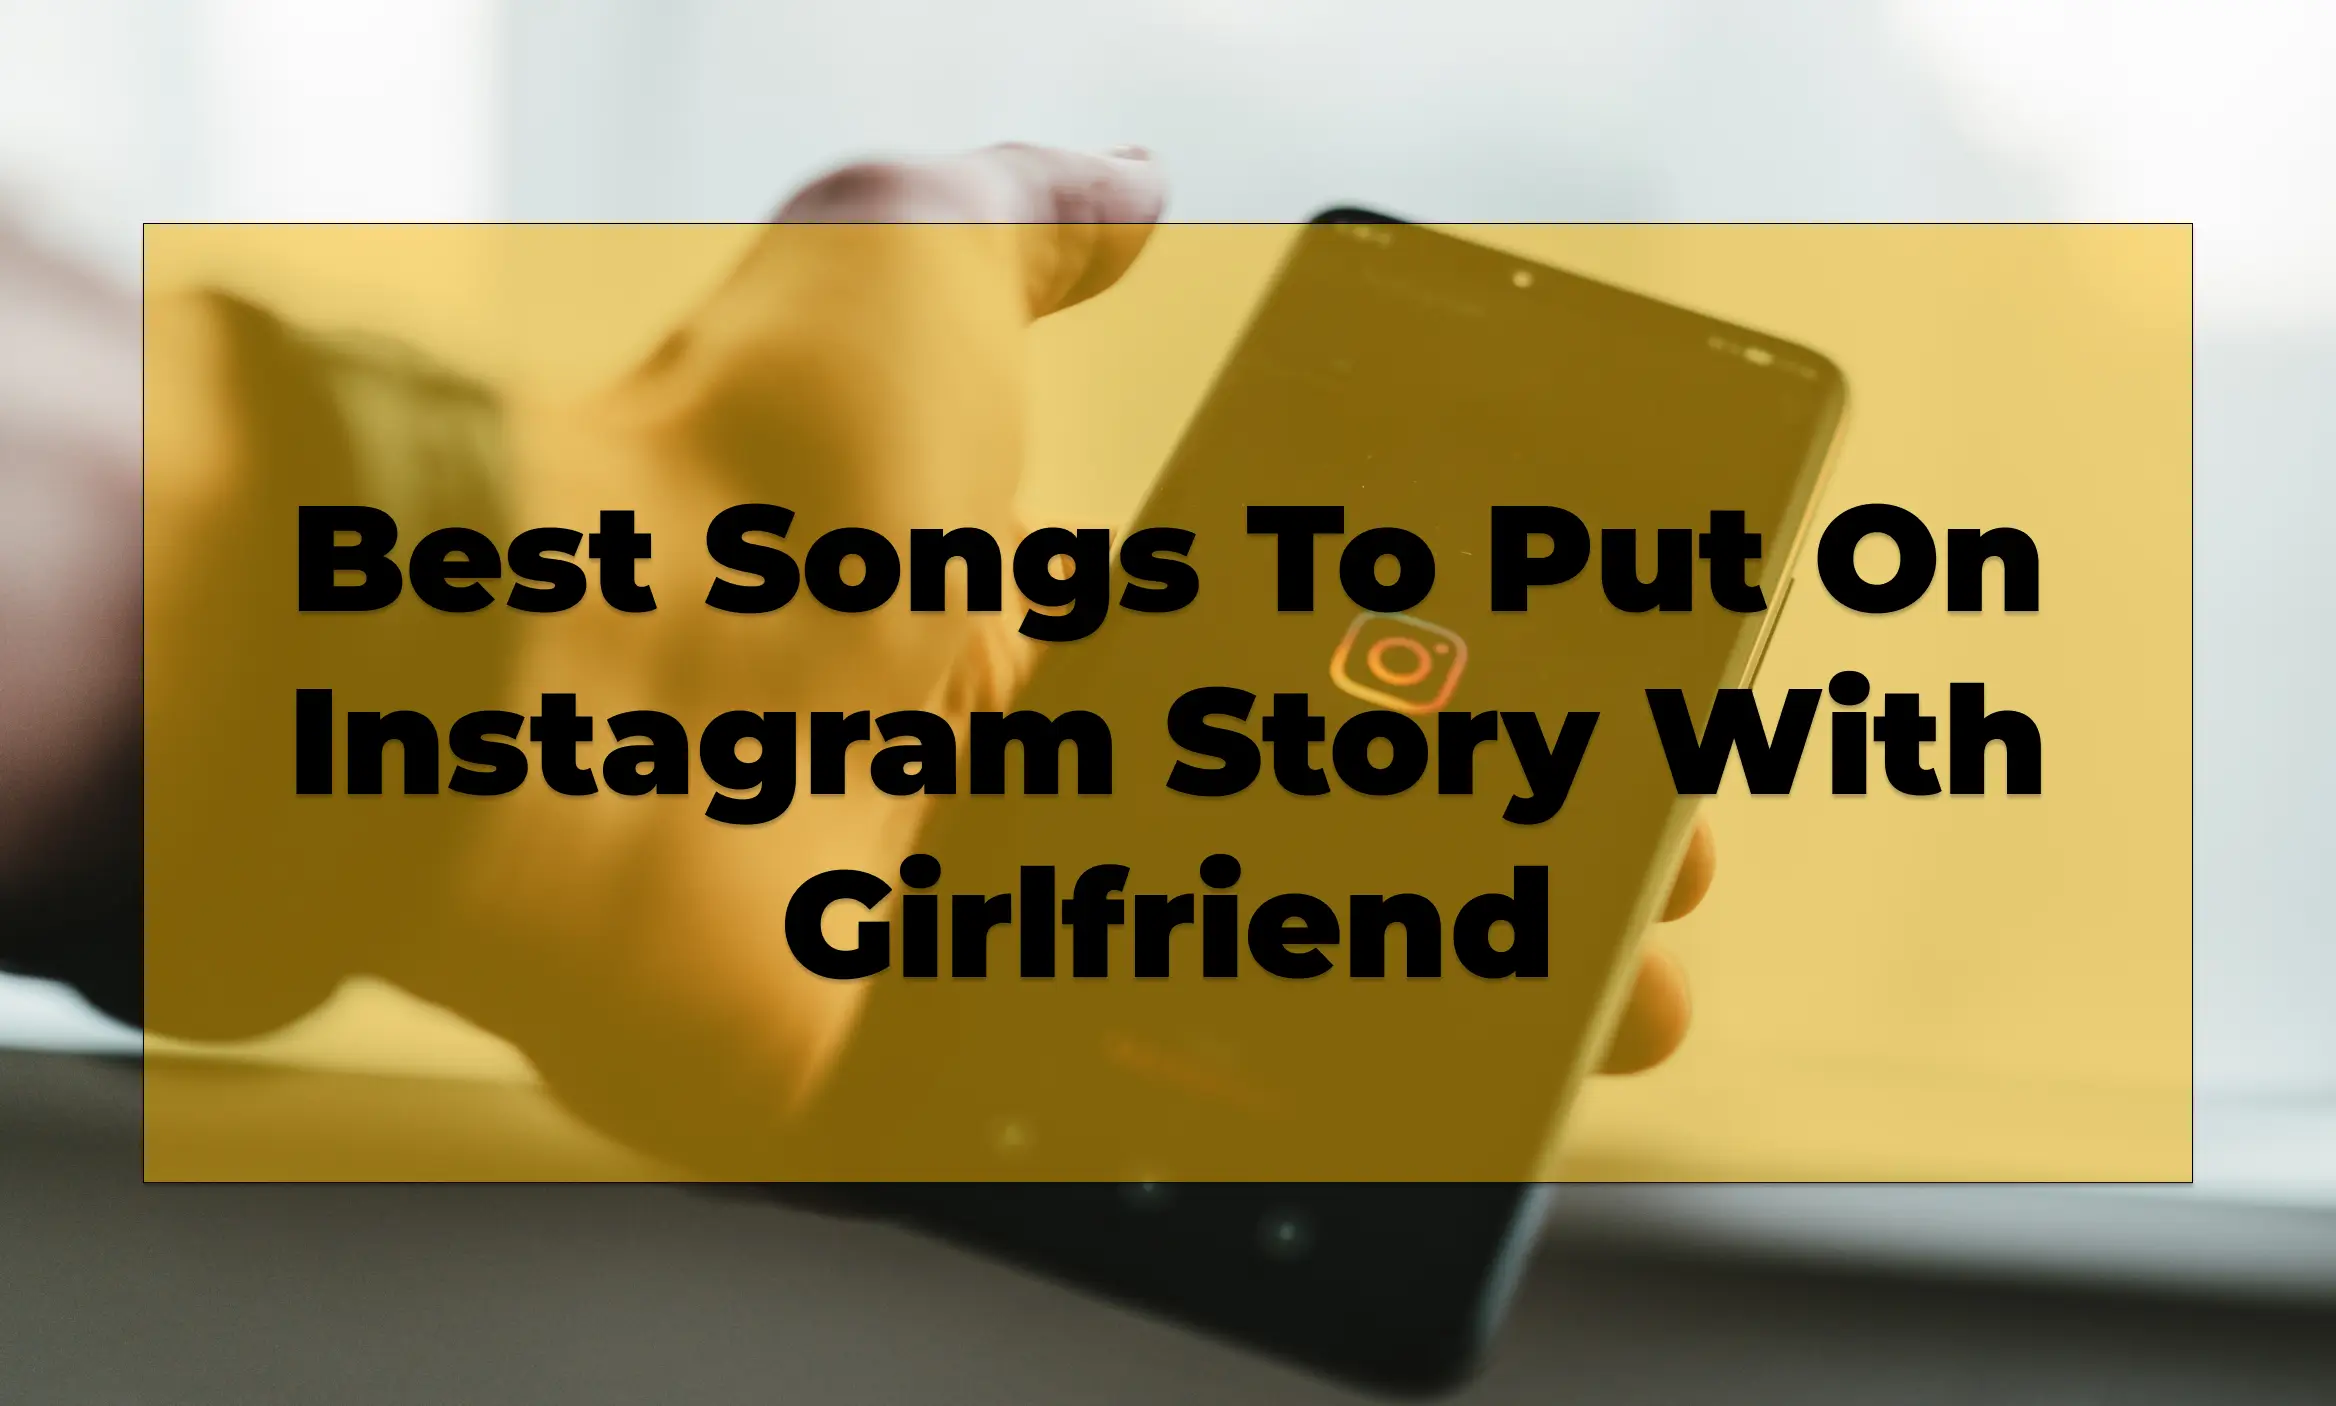 Best Songs To Put On Instagram Story With Girlfriend - SOTC